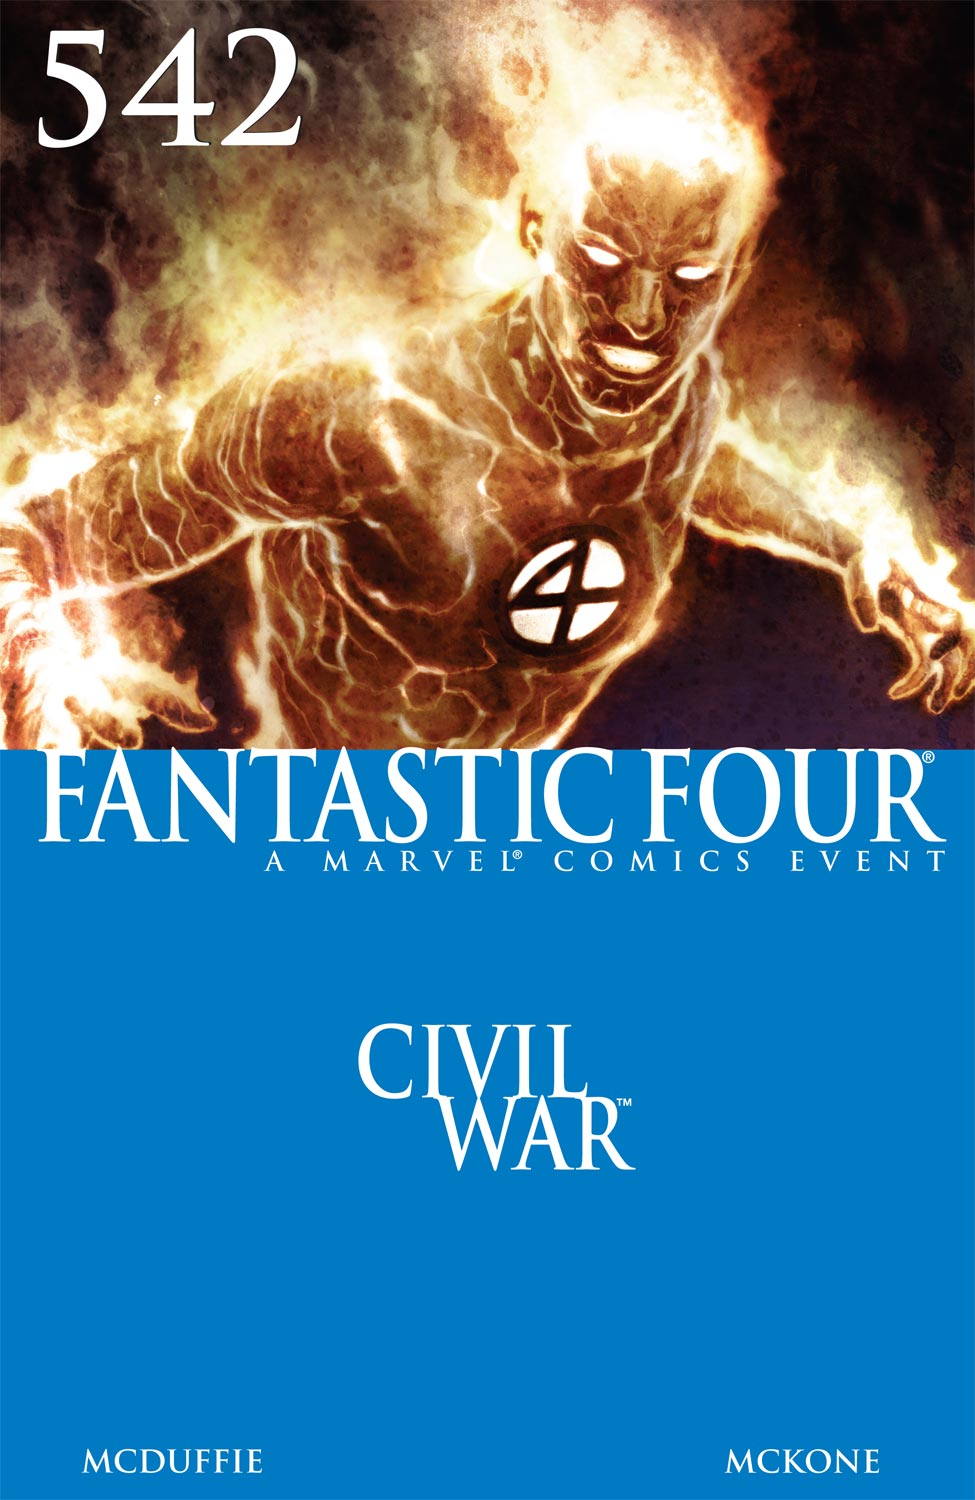 Read online Fantastic Four (1961) comic -  Issue #542 - 1